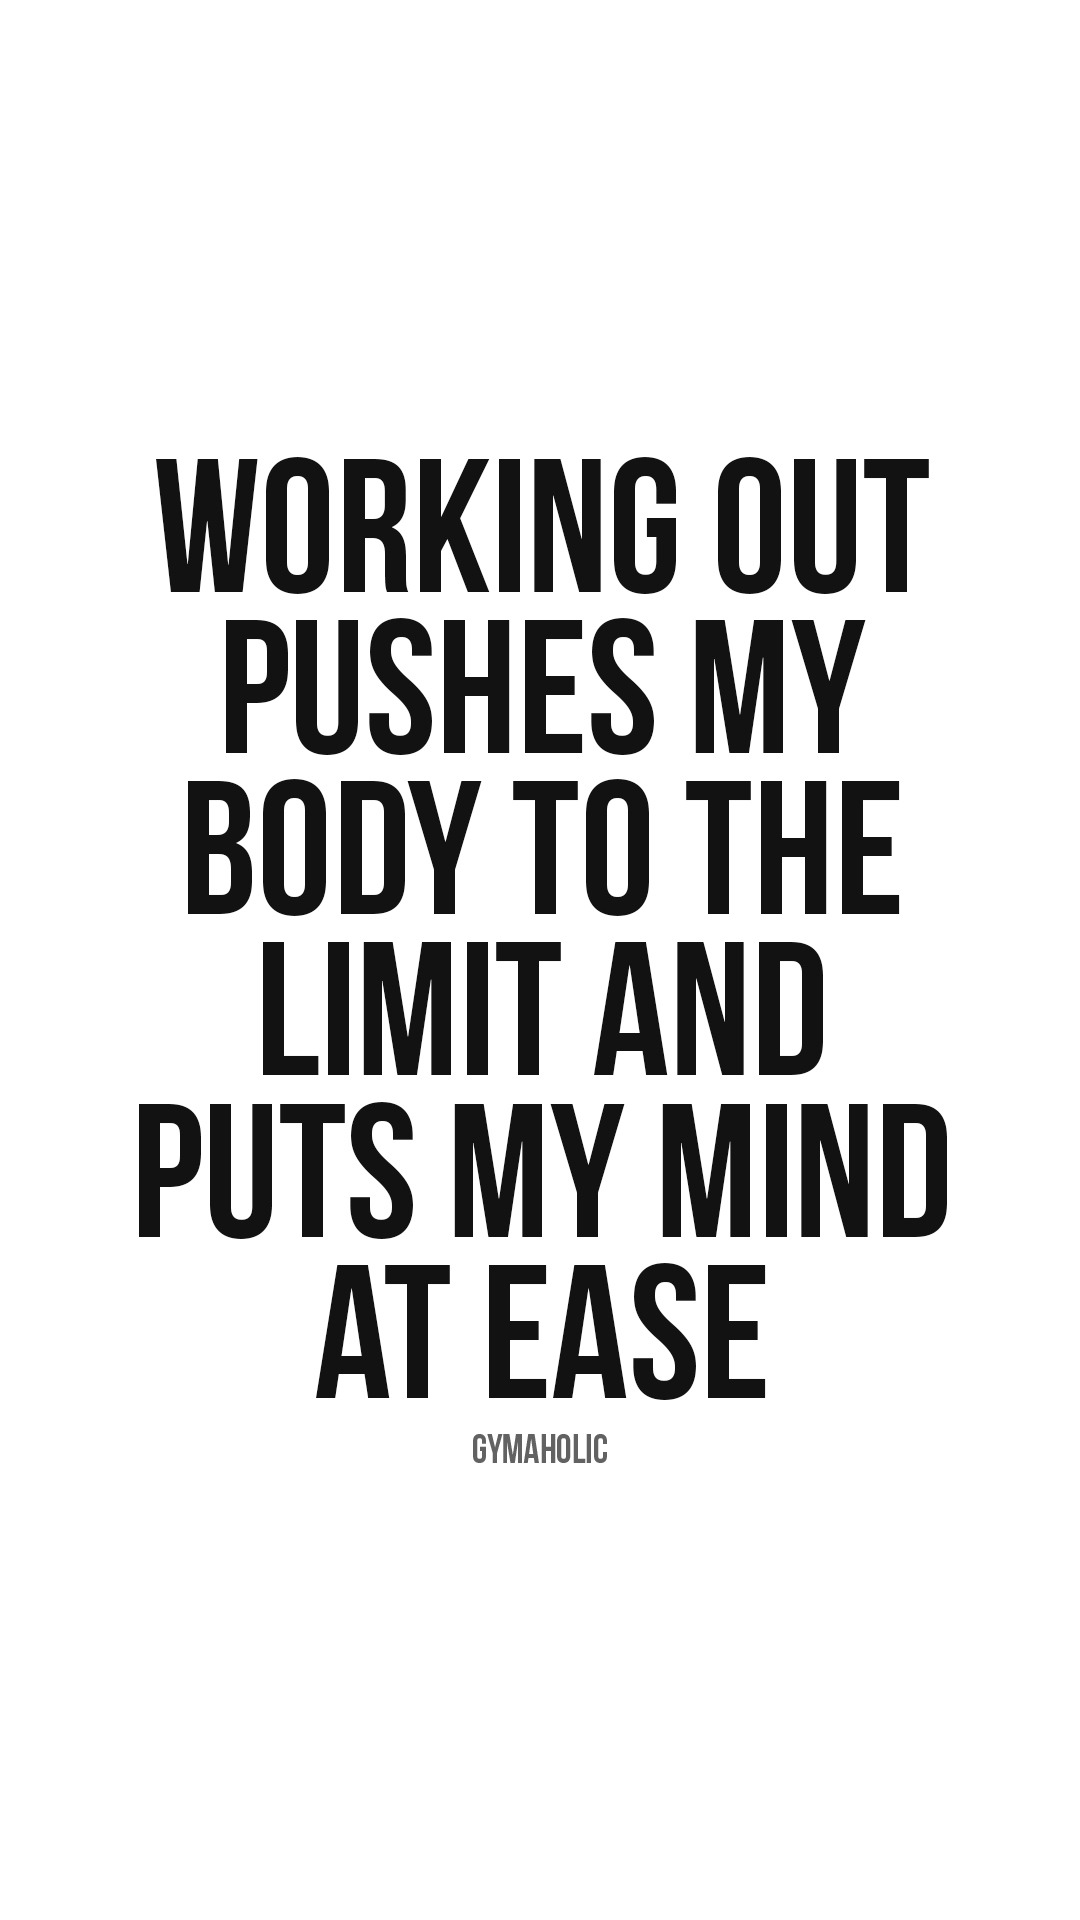 Working out pushes my body to the limit and puts my mind at ease